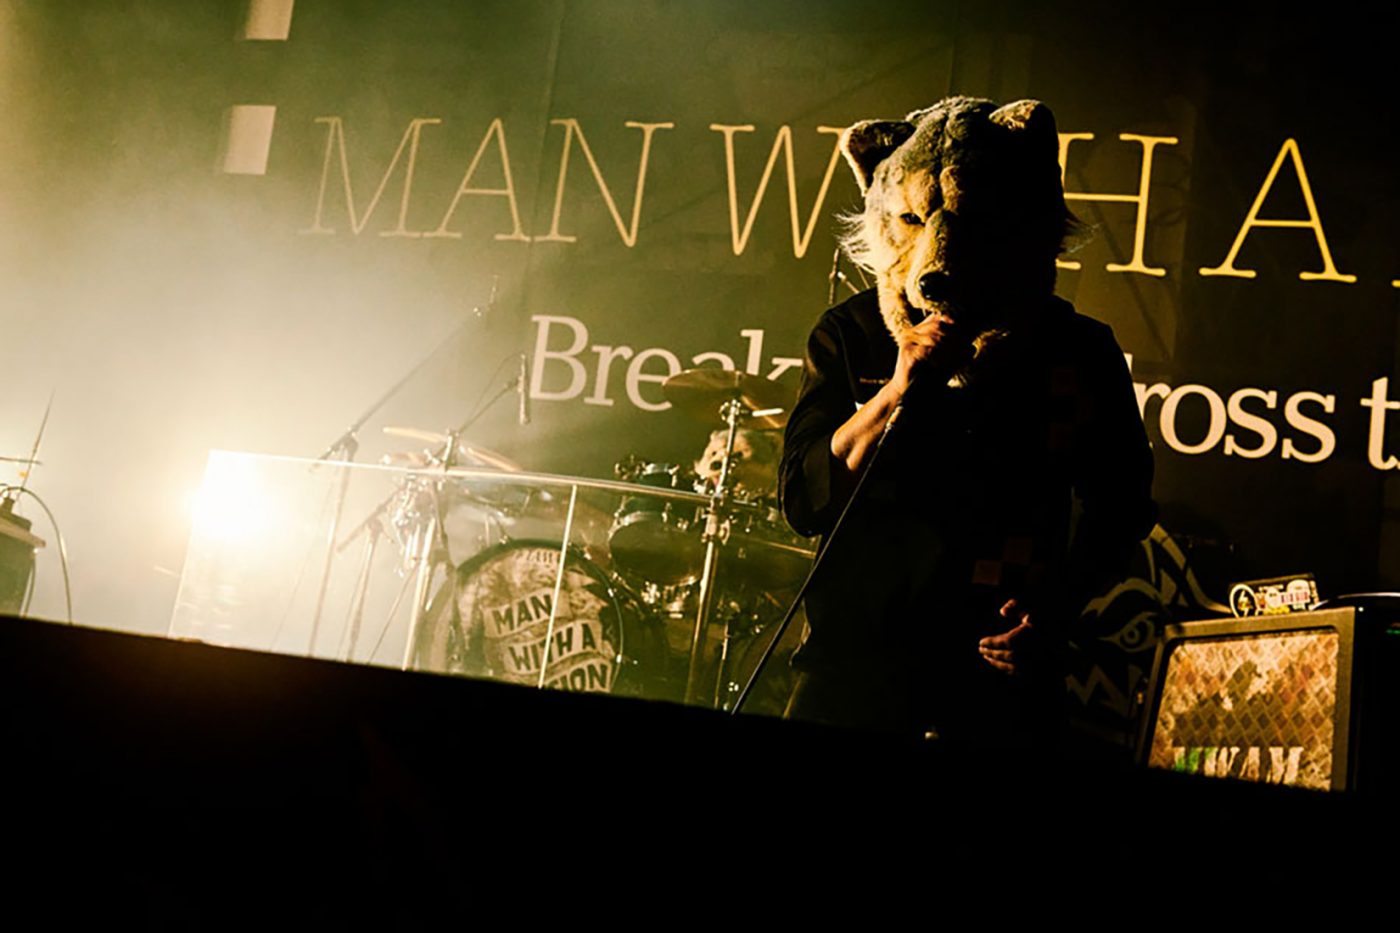 MAN WITH A MISSION、全国ツアーが広島で開幕！「カカッテキテヤッテクダサイ！」 - 画像一覧（11/11）